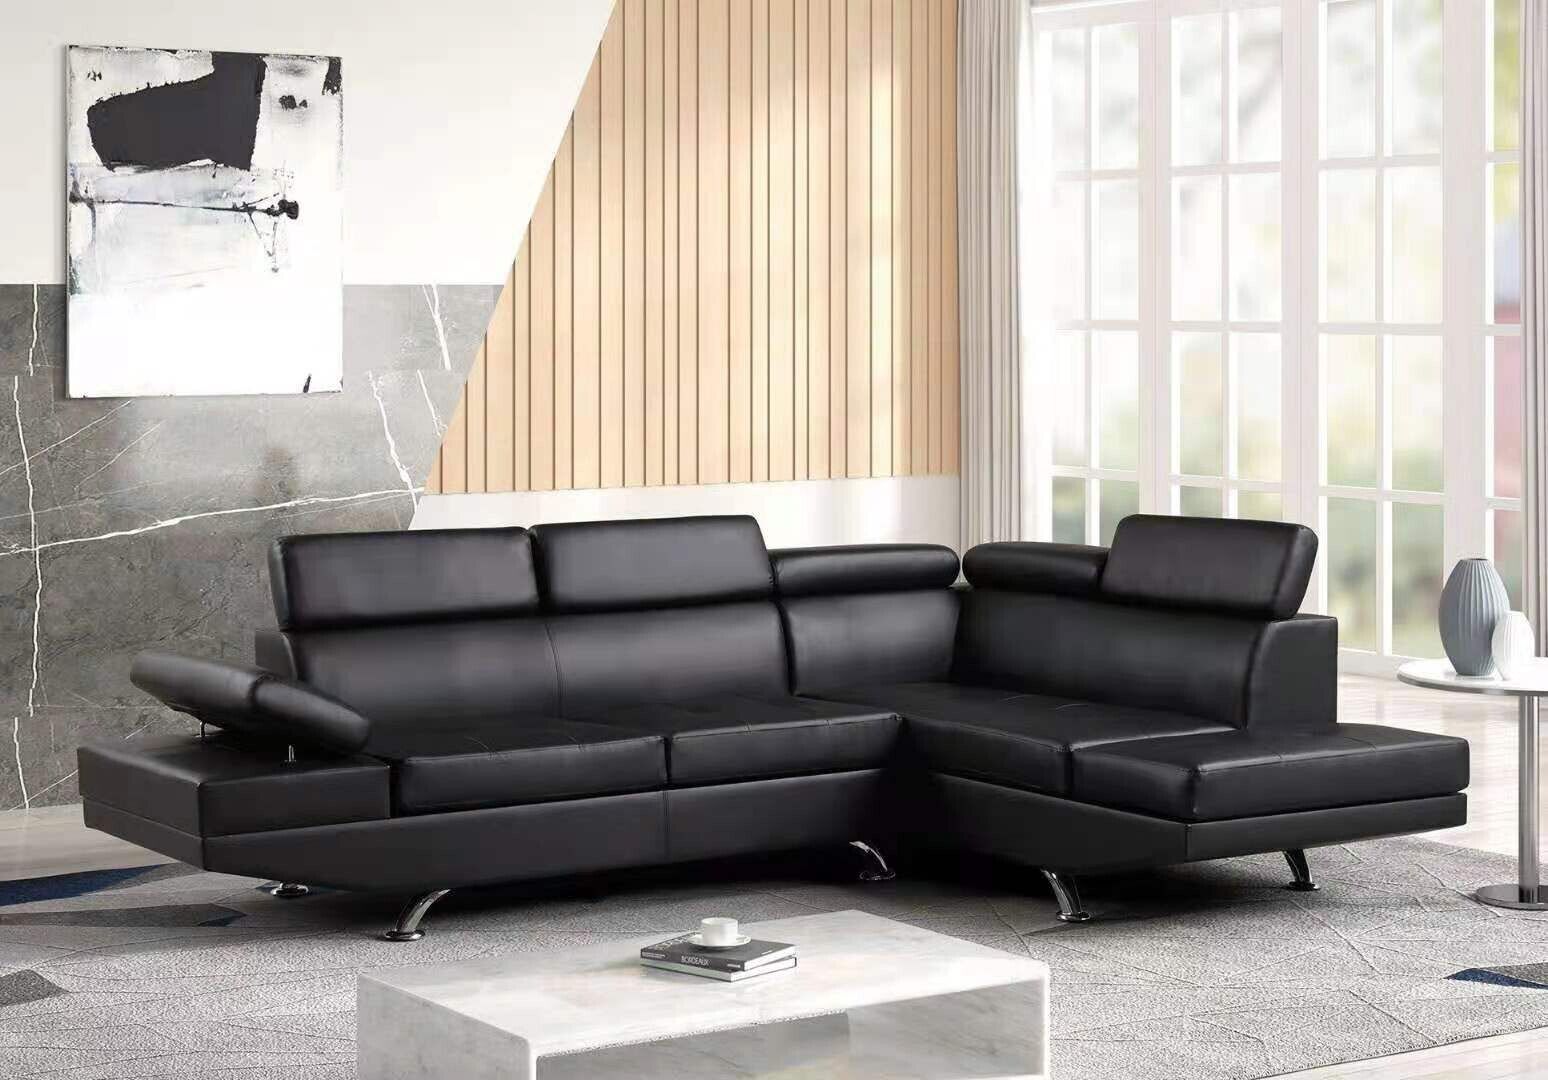 Moderno Contemporary Black Living room Sectional Sofa Set In Vegan leather